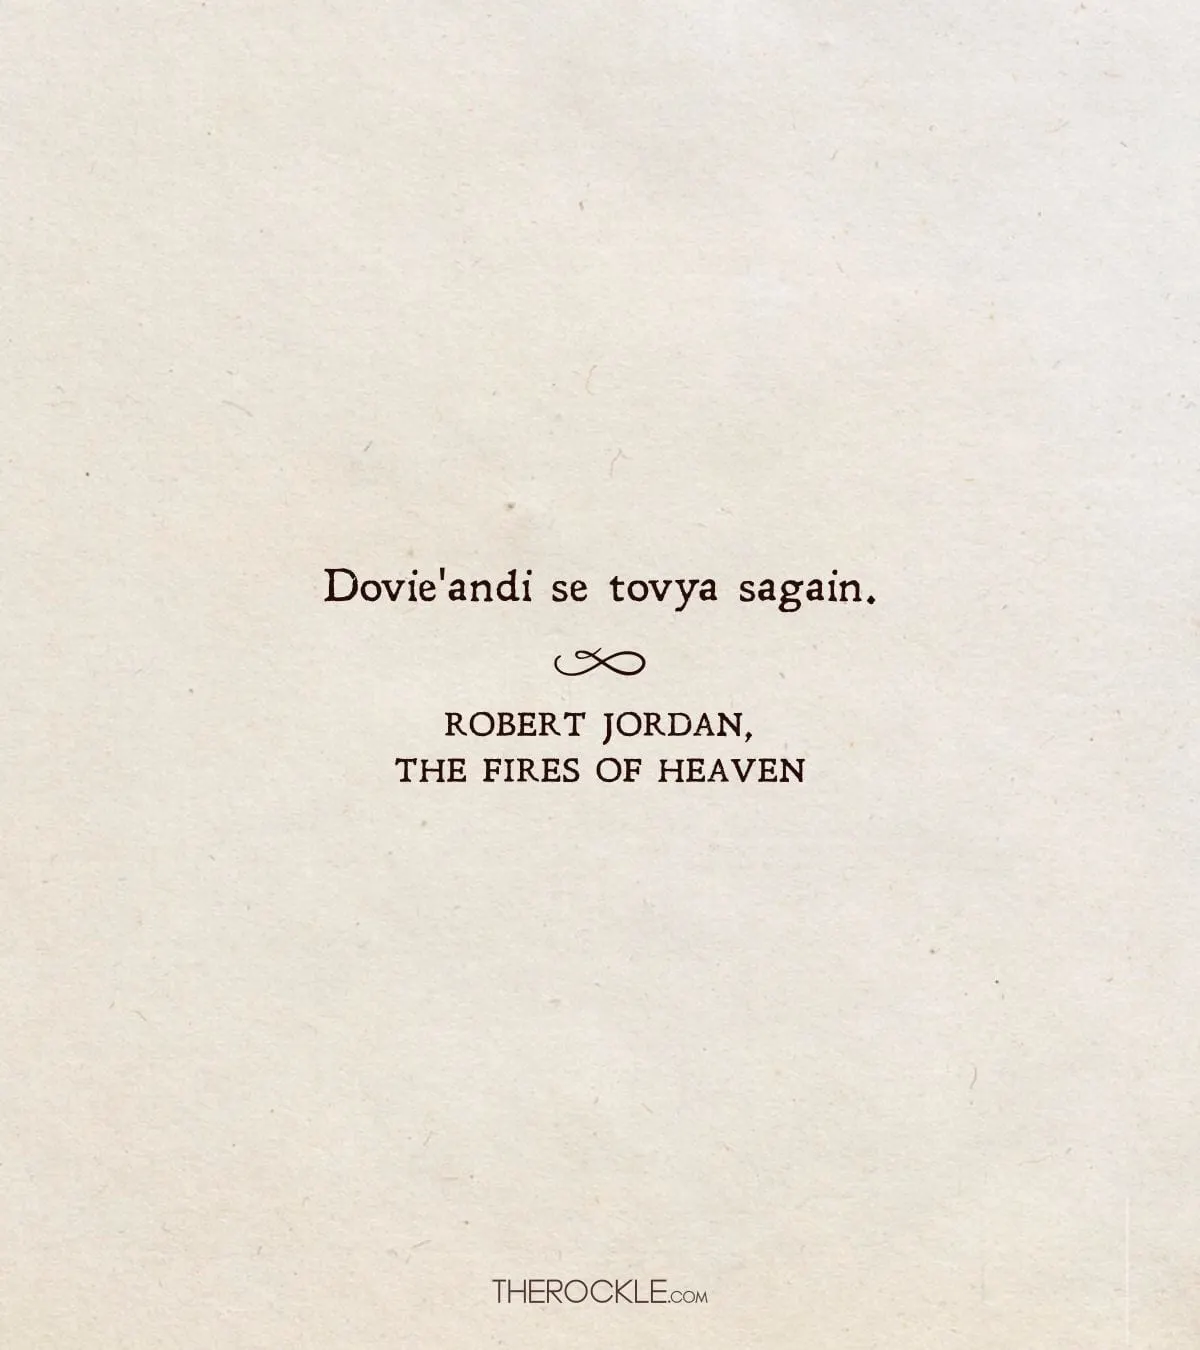 The Fires of Heaven quote